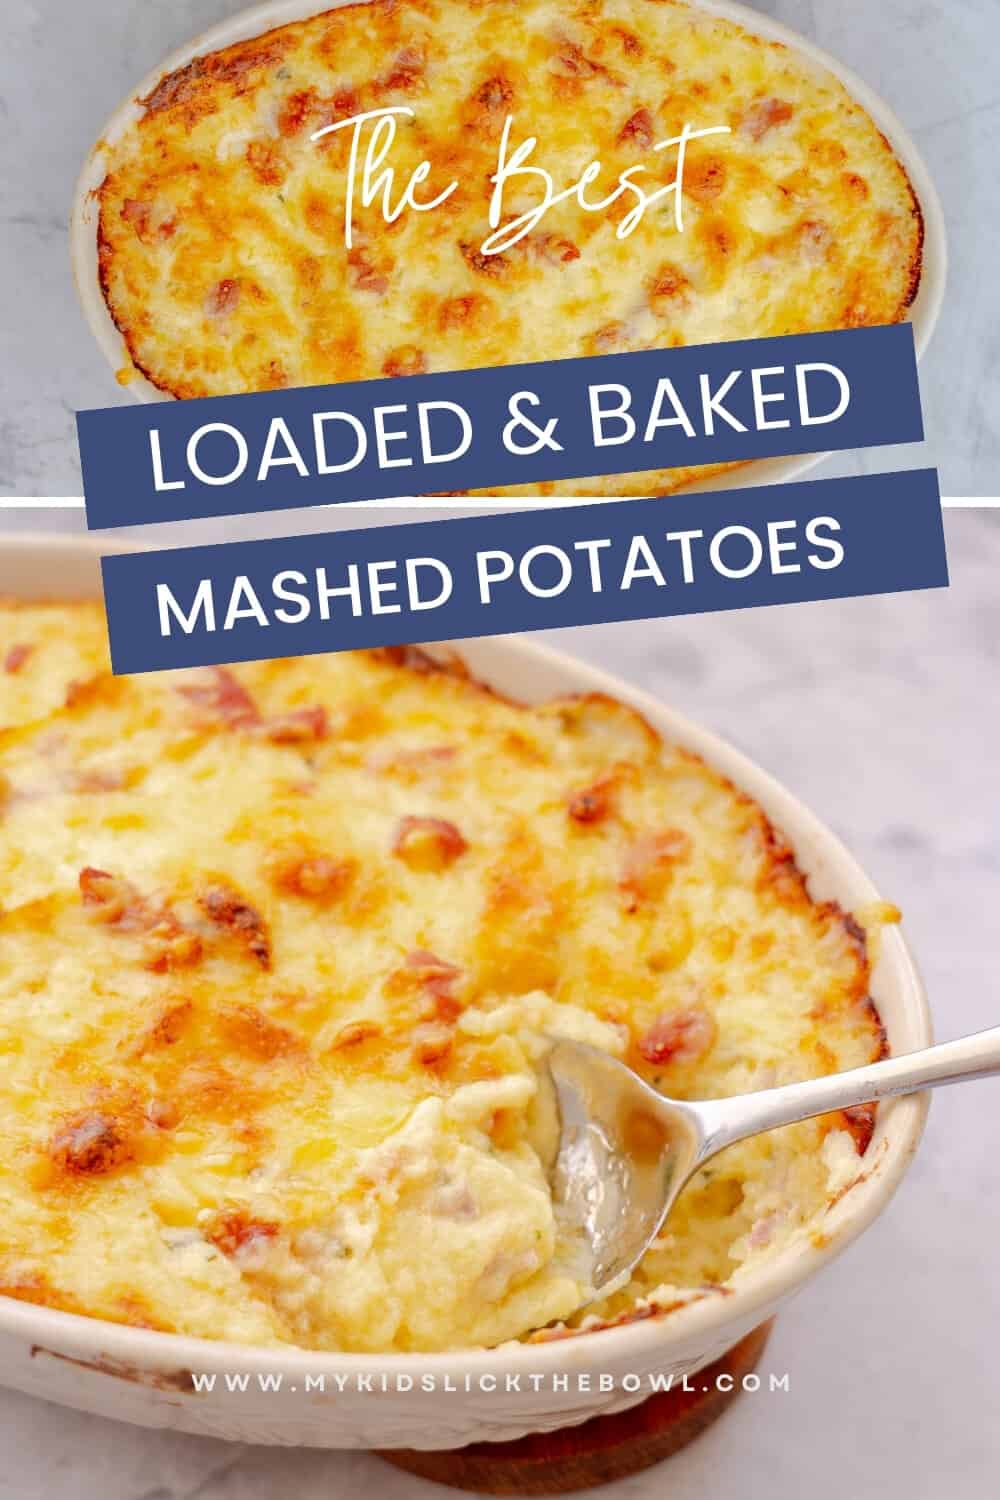 Baked Mashed Potatoes - My Kids Lick The Bowl